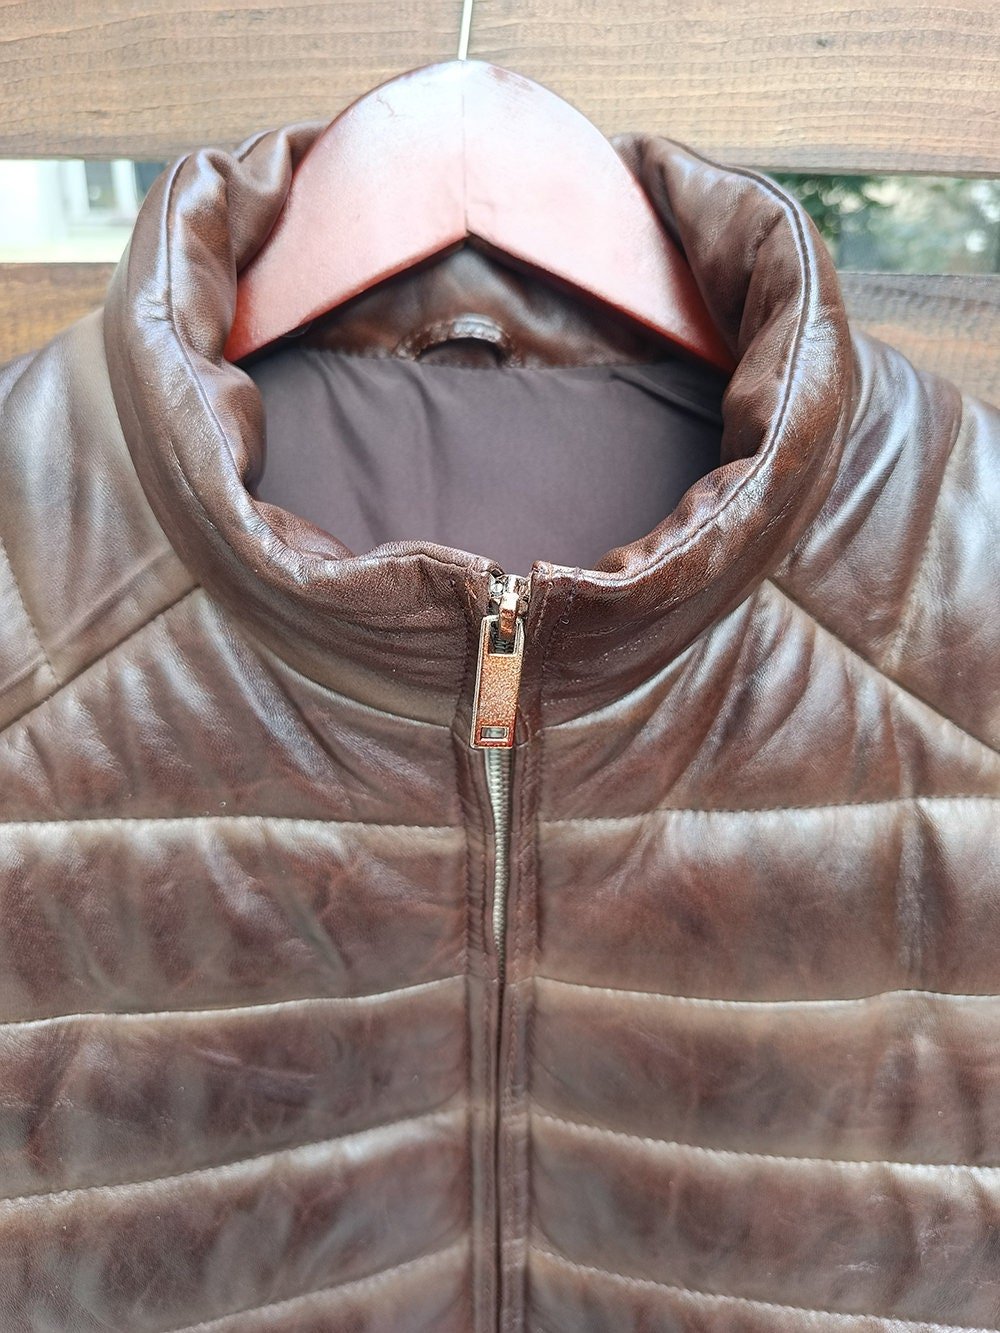 Handmade Leather Down Vest with 2 Color  Tailored to Your Size lambskin, Gifts For Men  99percenthandmade   